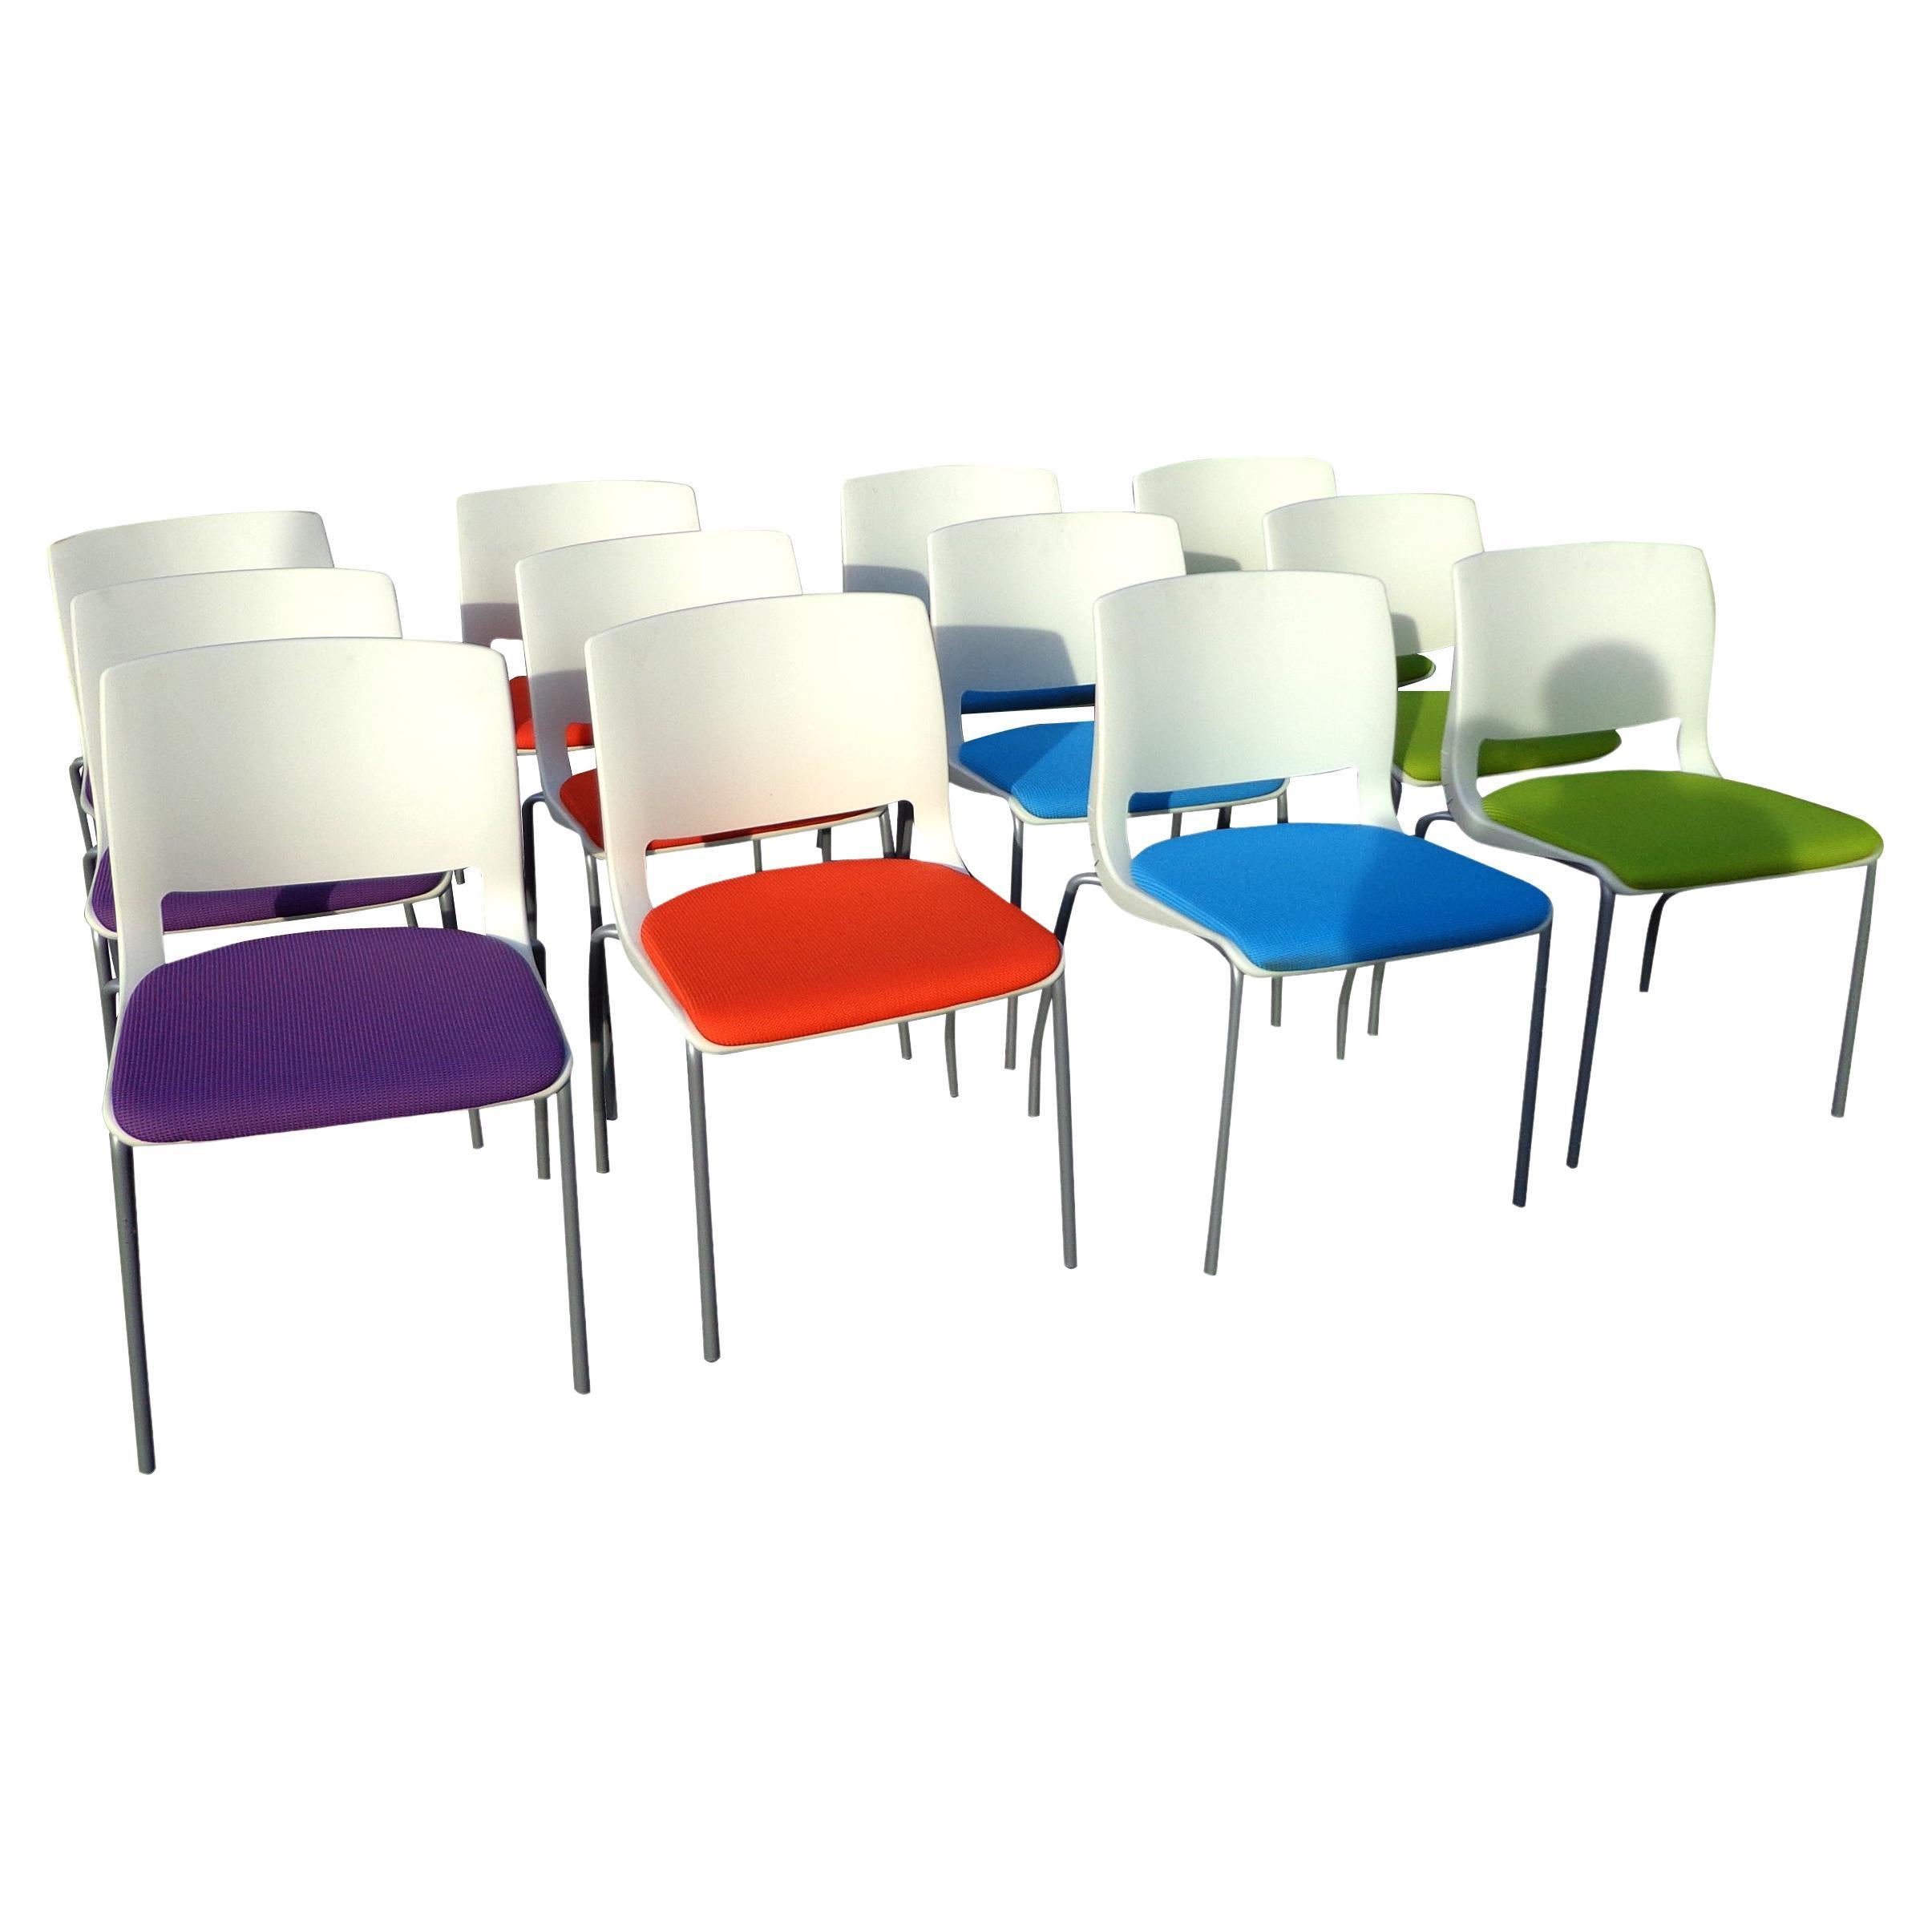 1 Teknion Variable Stacking Chair by by Alessandro Piretti